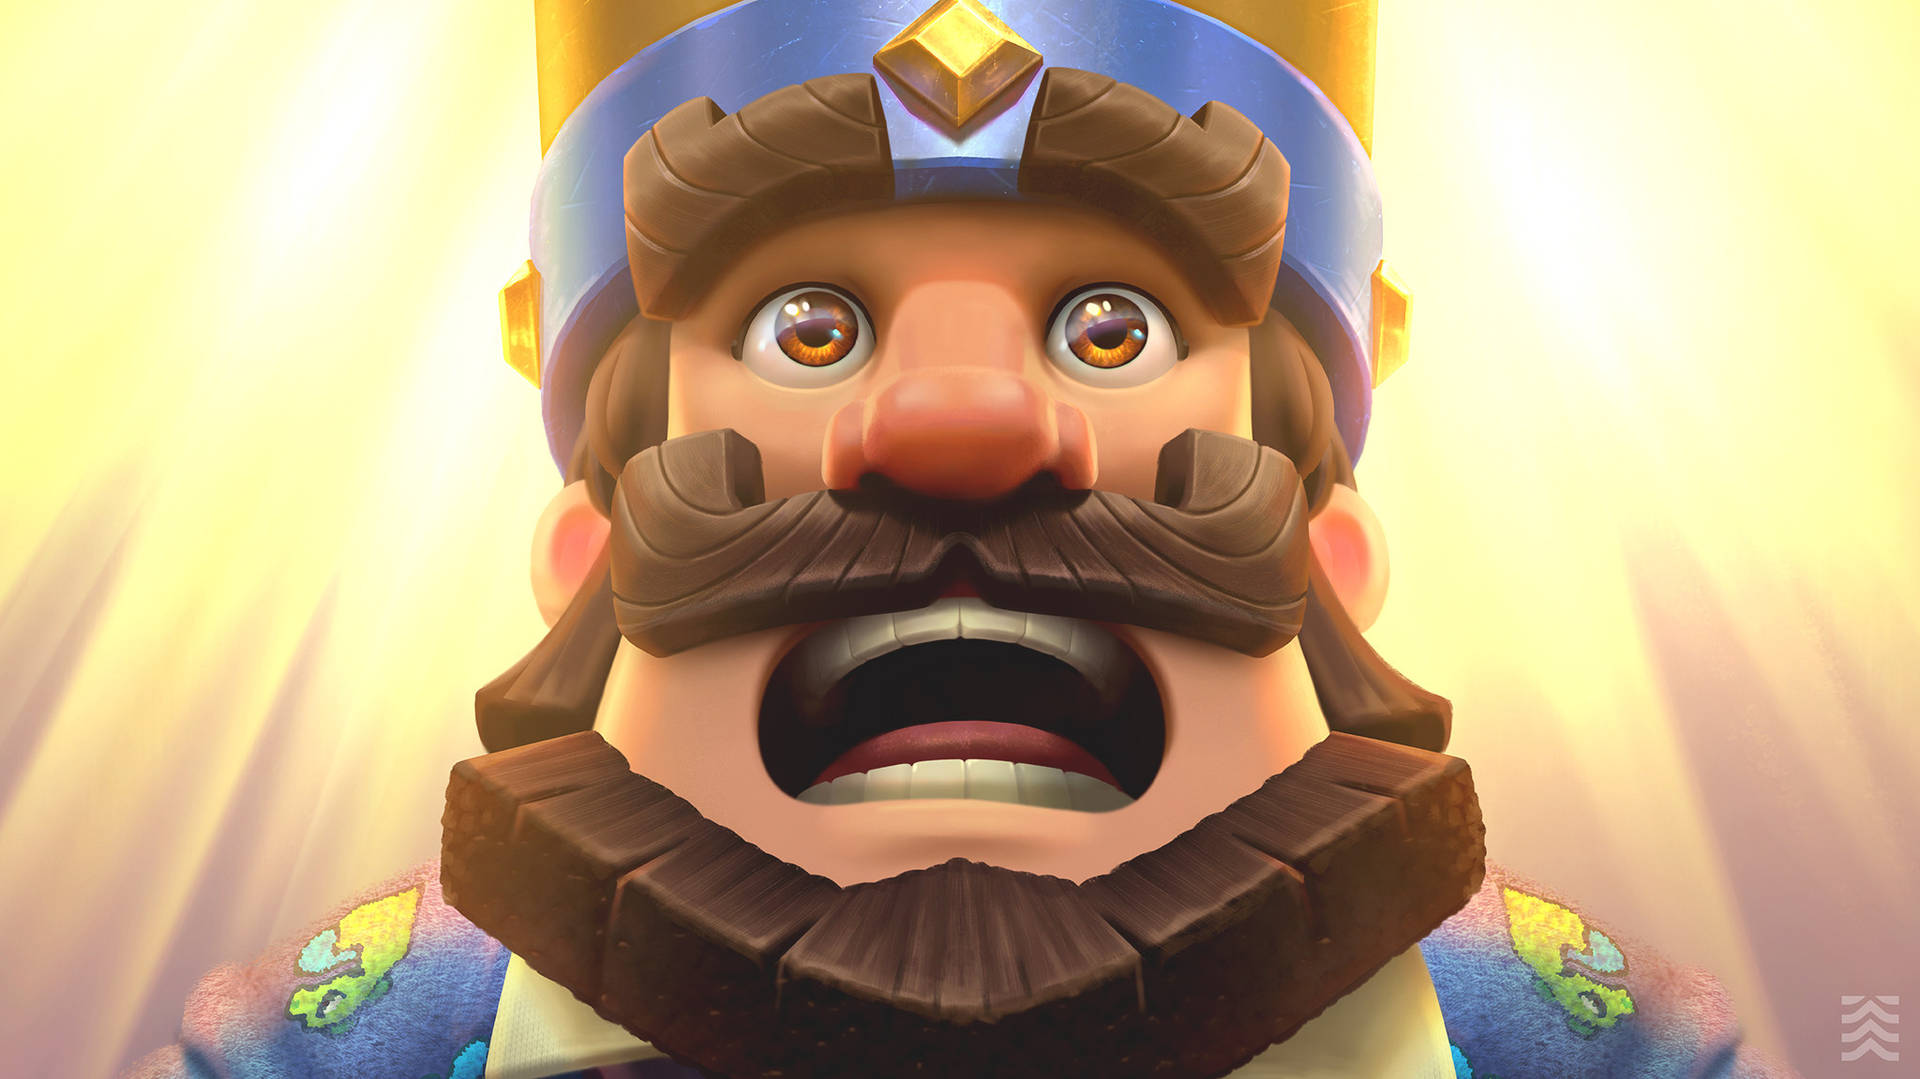 King From The Clash Royale Phone Game Looking Surprised